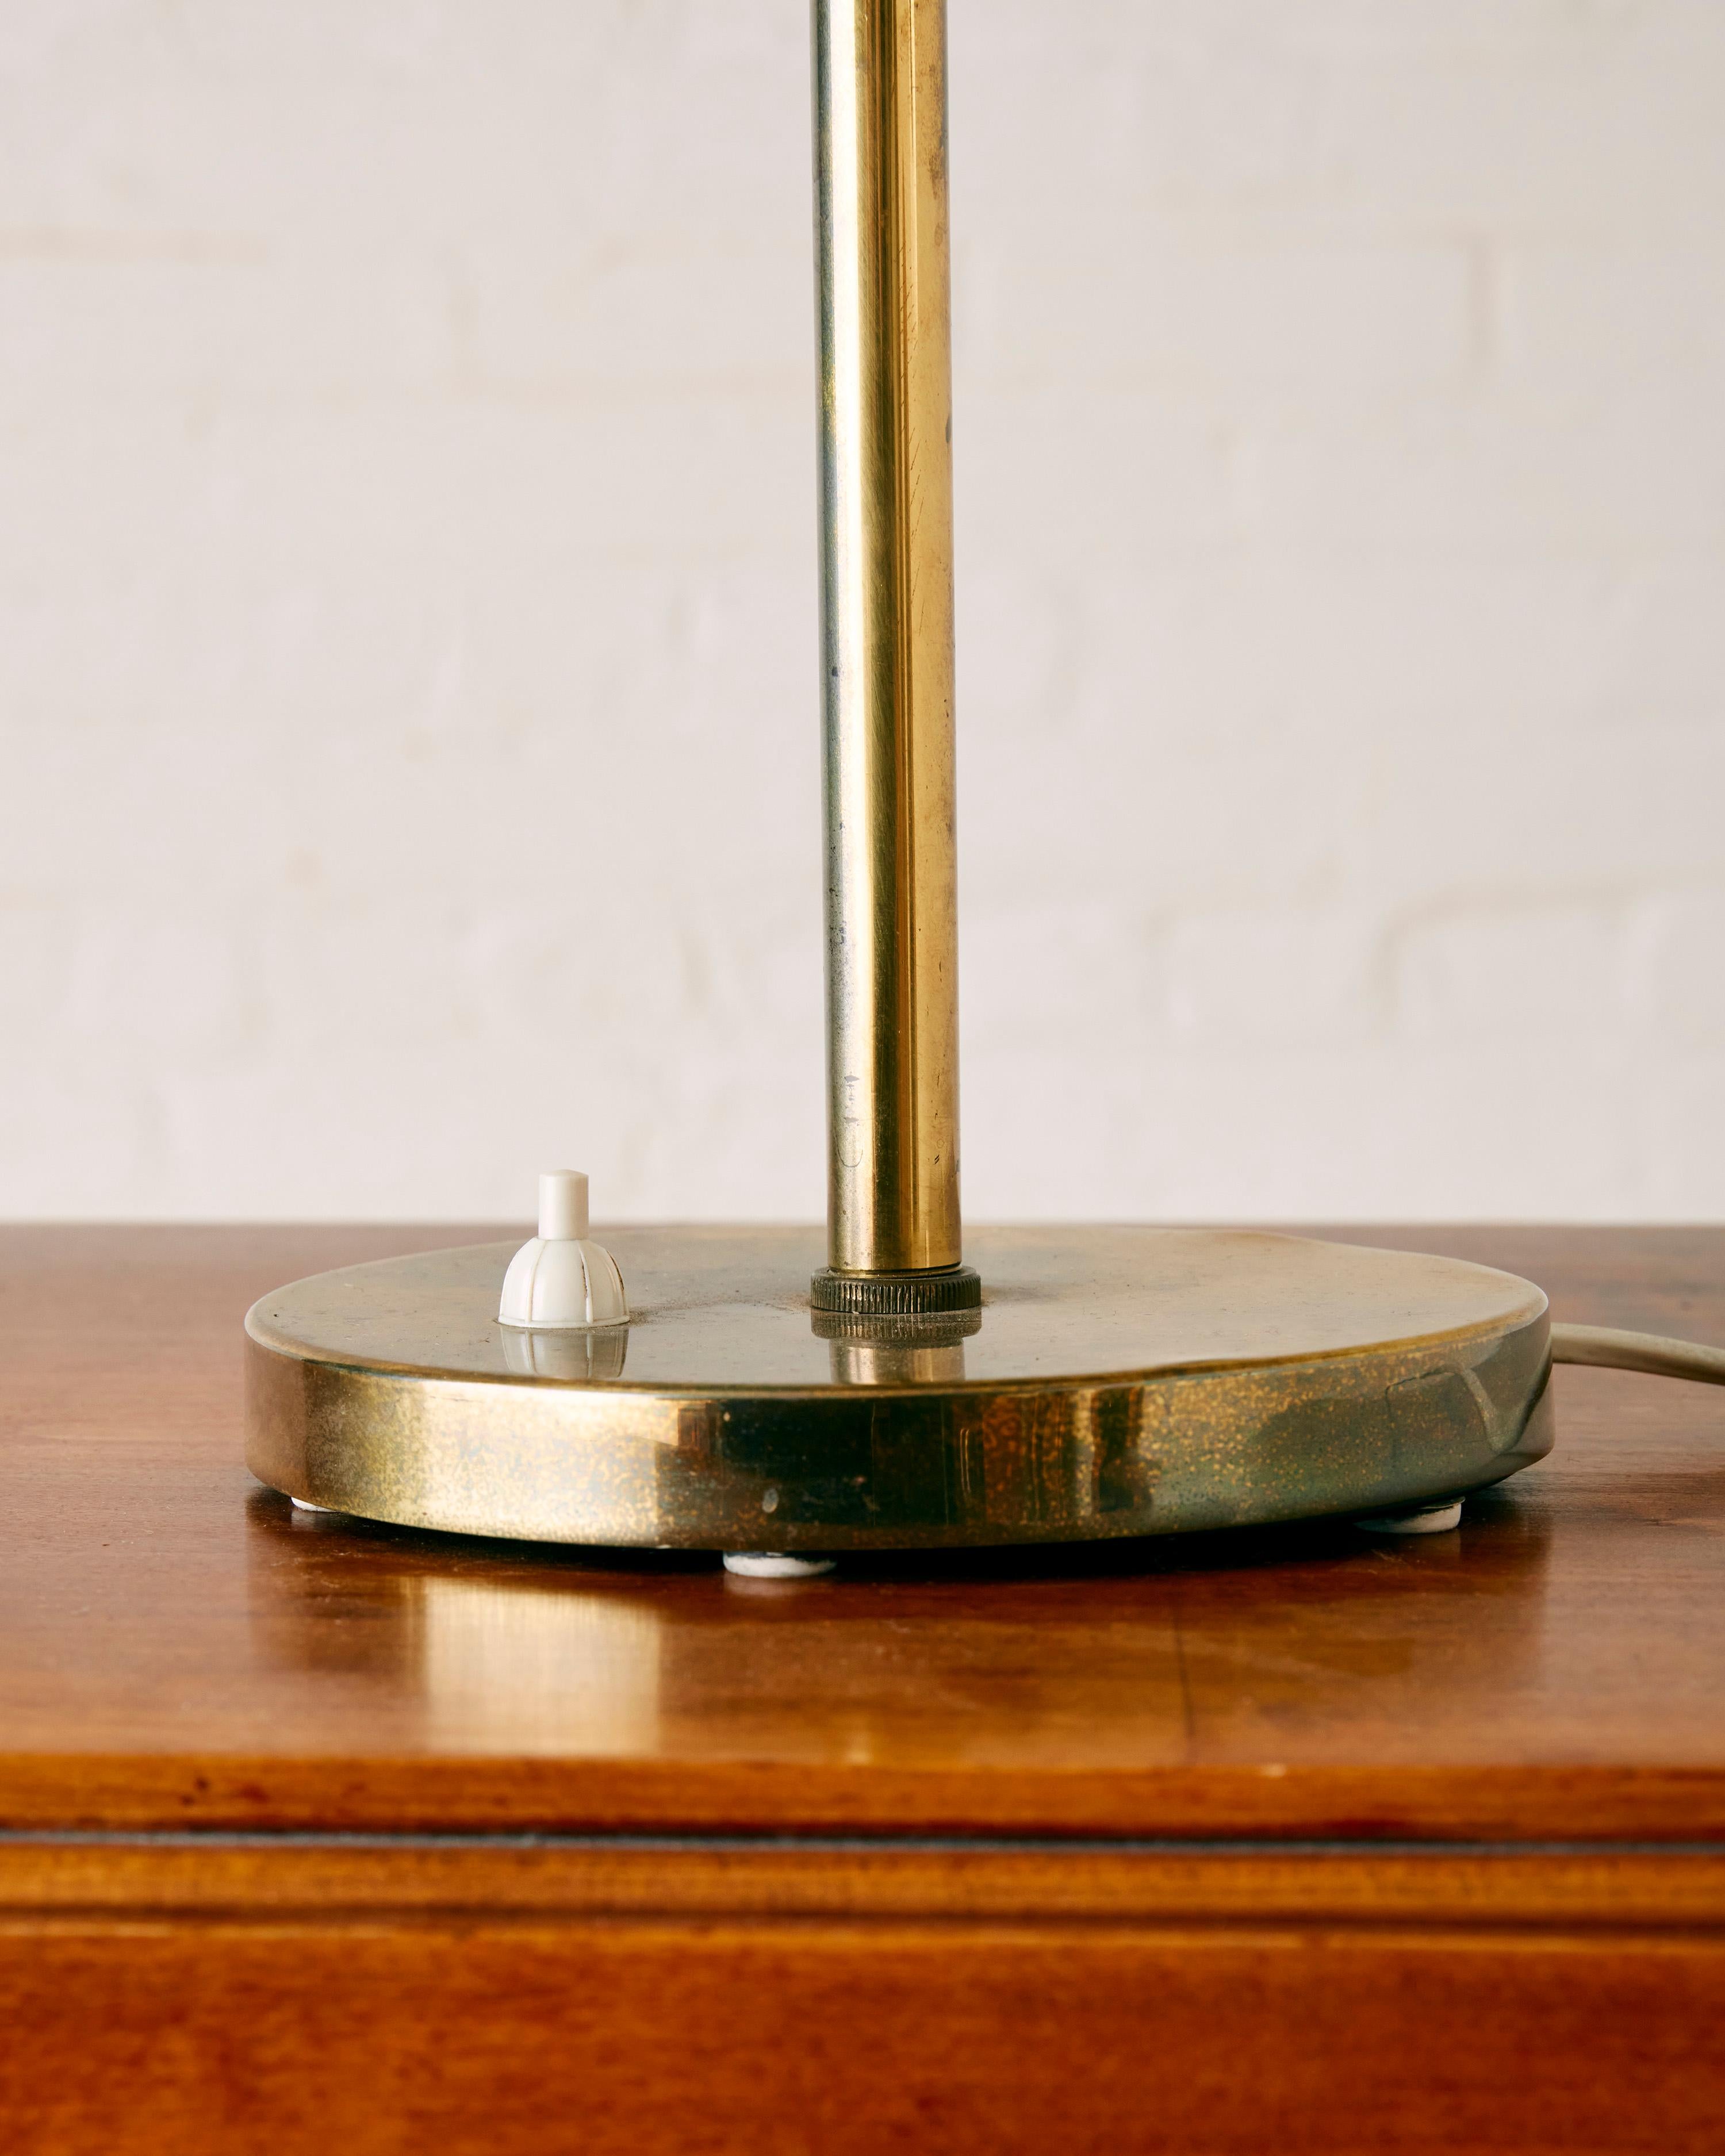 Table lamp, designed by Kai Ruokenen for Lynx Finland, incorporates two brass plates as shades, providing the option for multiple sources of illumination.

Dimensions: 56.5